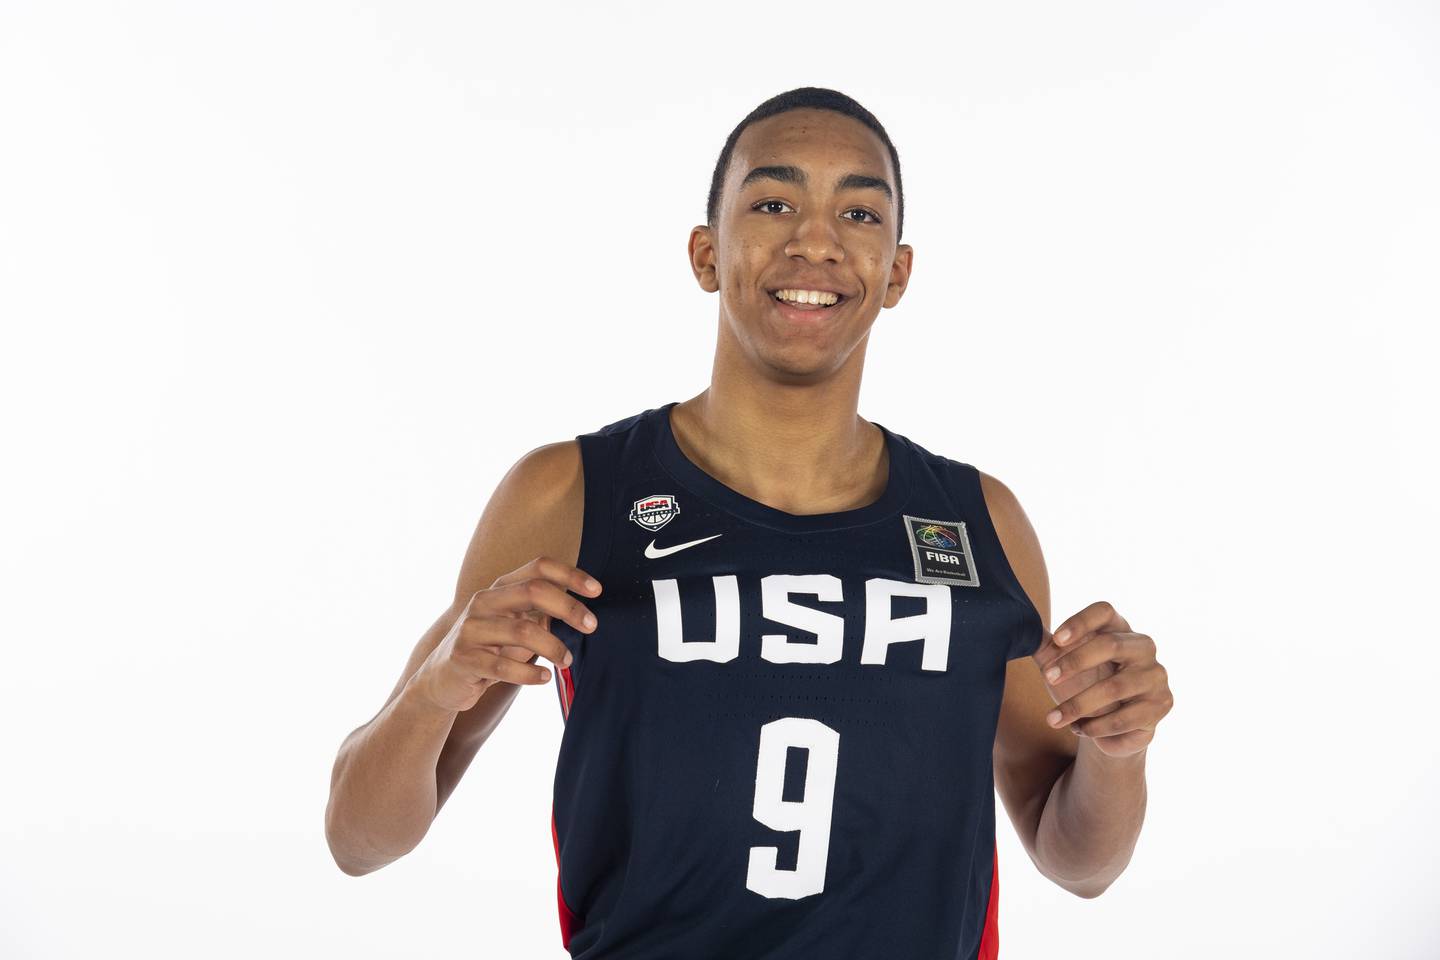 Bryson Tucker won a Gold Medal playing for the USA Basketball National Team at the 2021 FIBA Americas U16 Championship